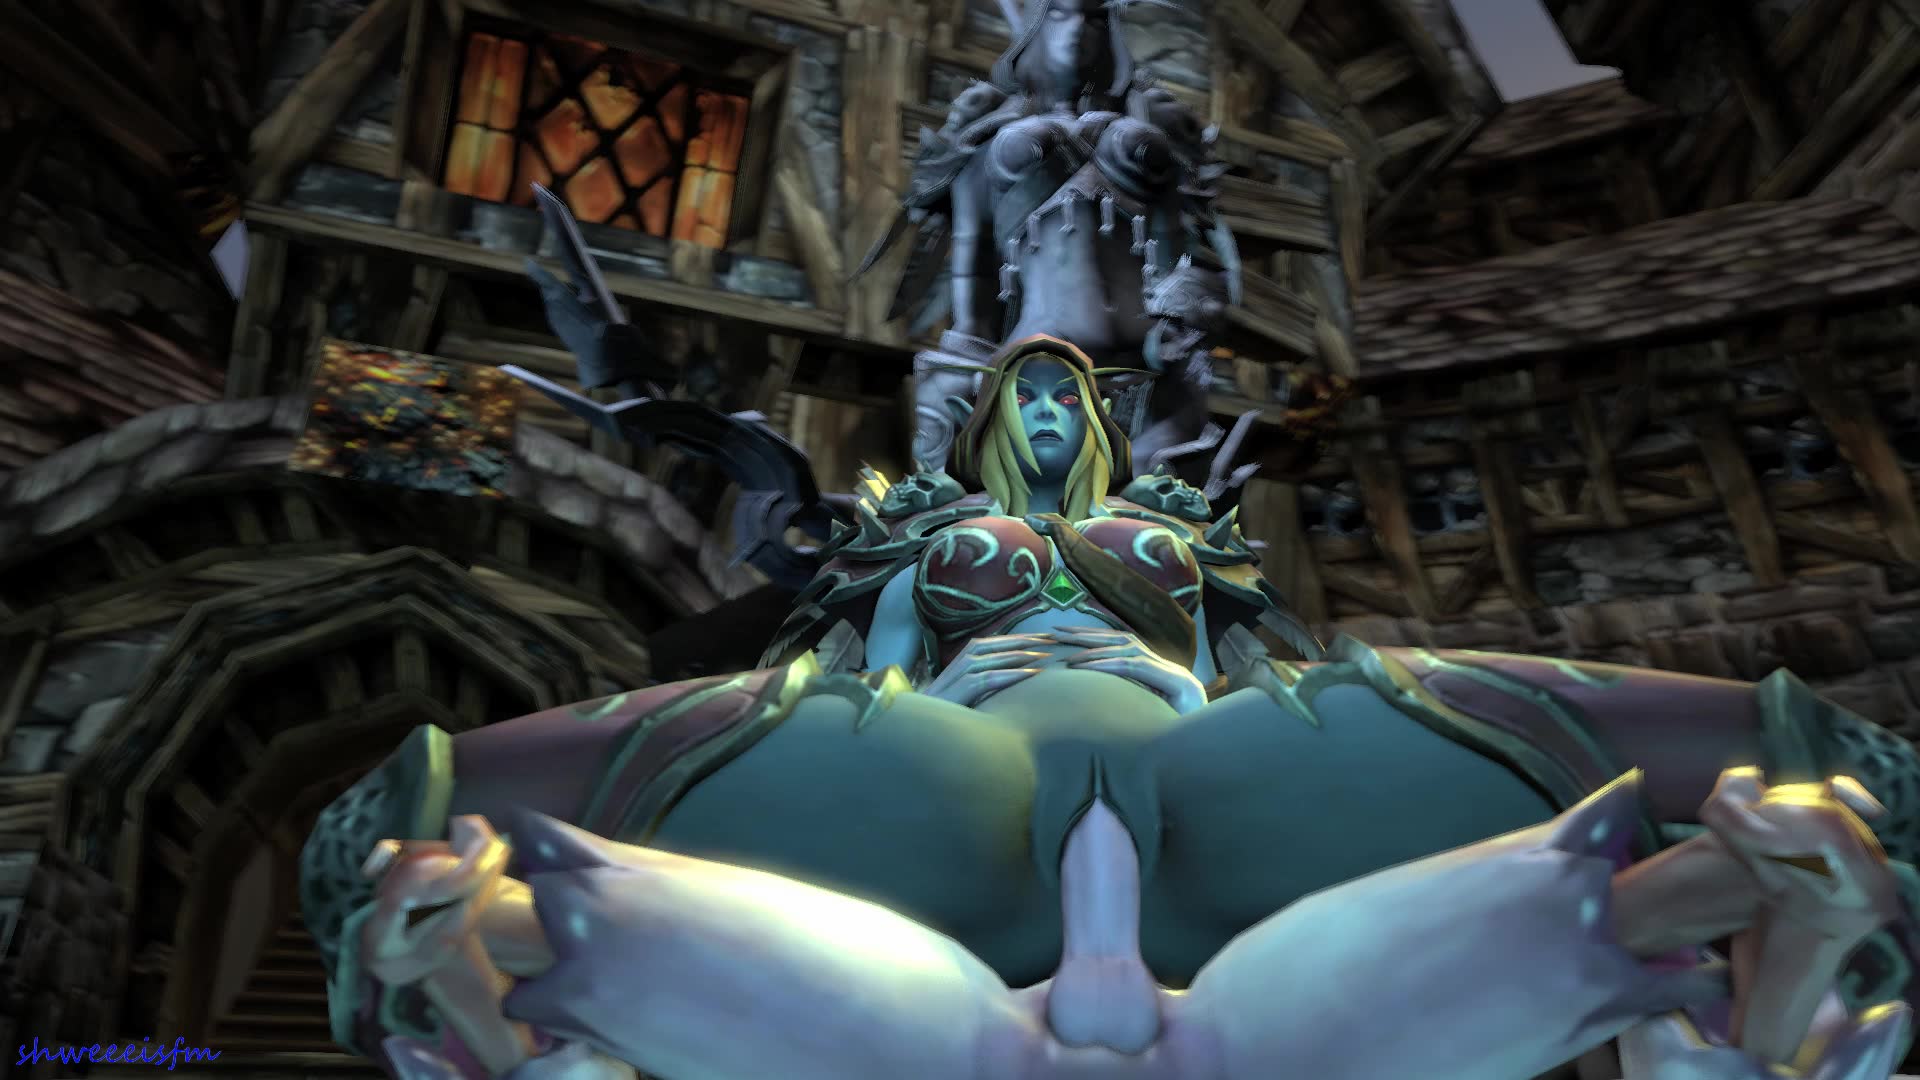 Sylvanas Windrunner Rides Big Cock In Reverse Cowgirl Position – World Of Warcraft NSFW animation thumbnail